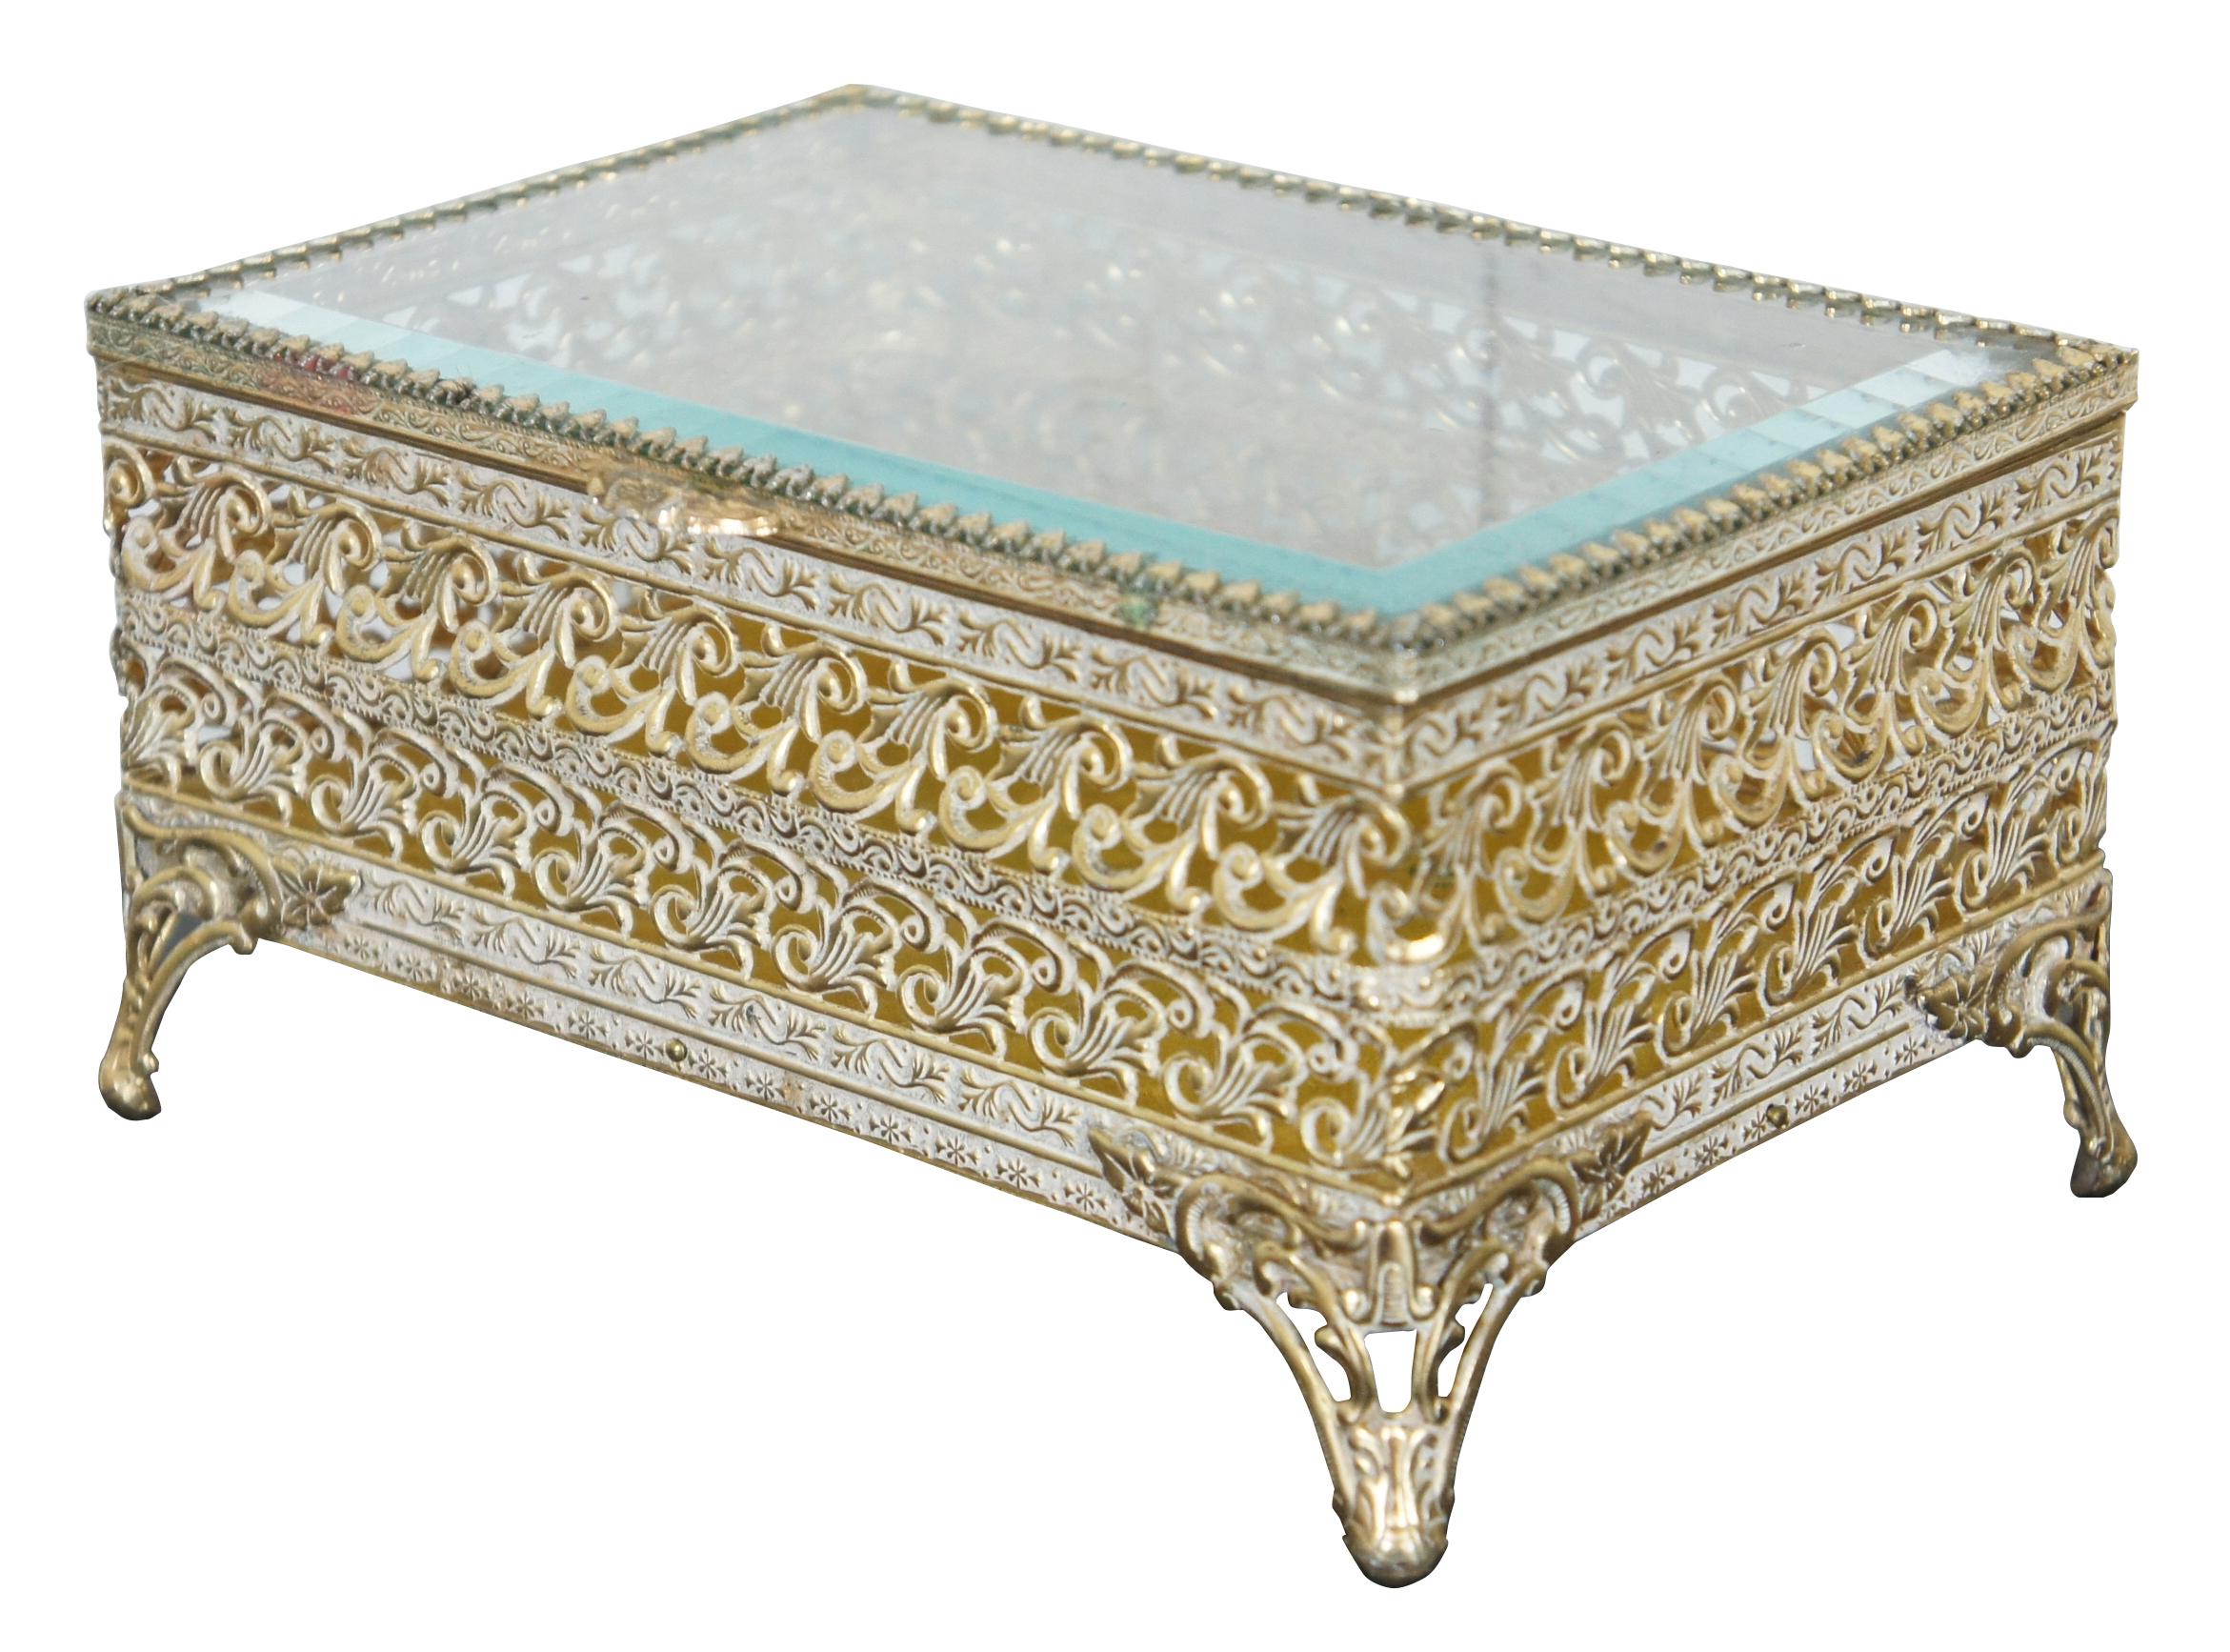 Antique brass filigree trinket/jewelry box with beveled glass lid, and footed with ornate design.
 